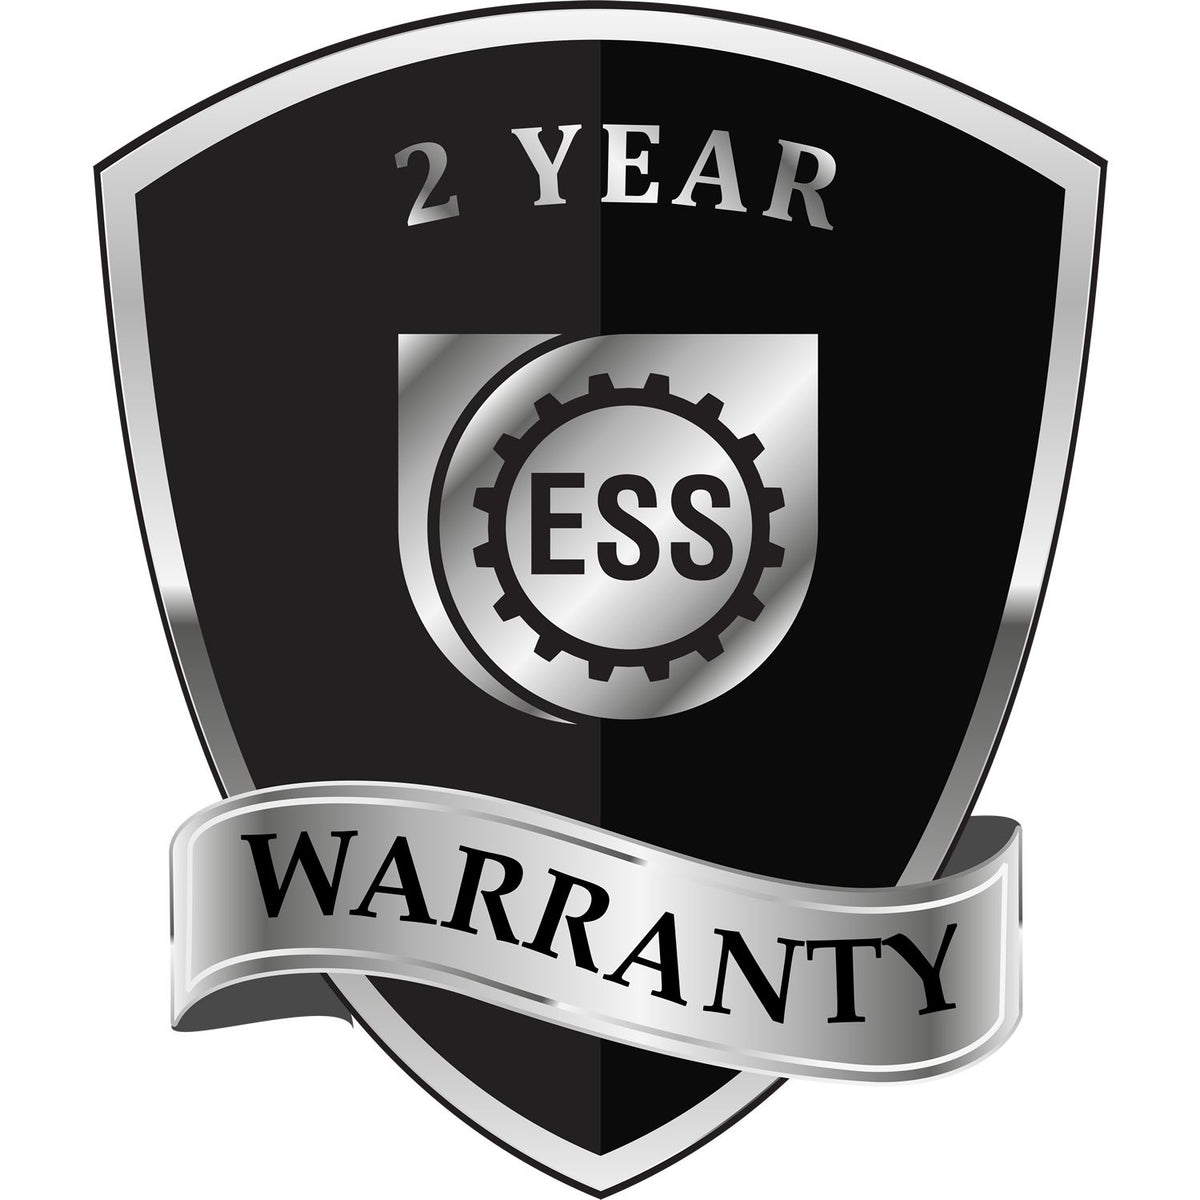 A black and silver badge or emblem showing warranty information for the Hybrid Arizona Architect Seal